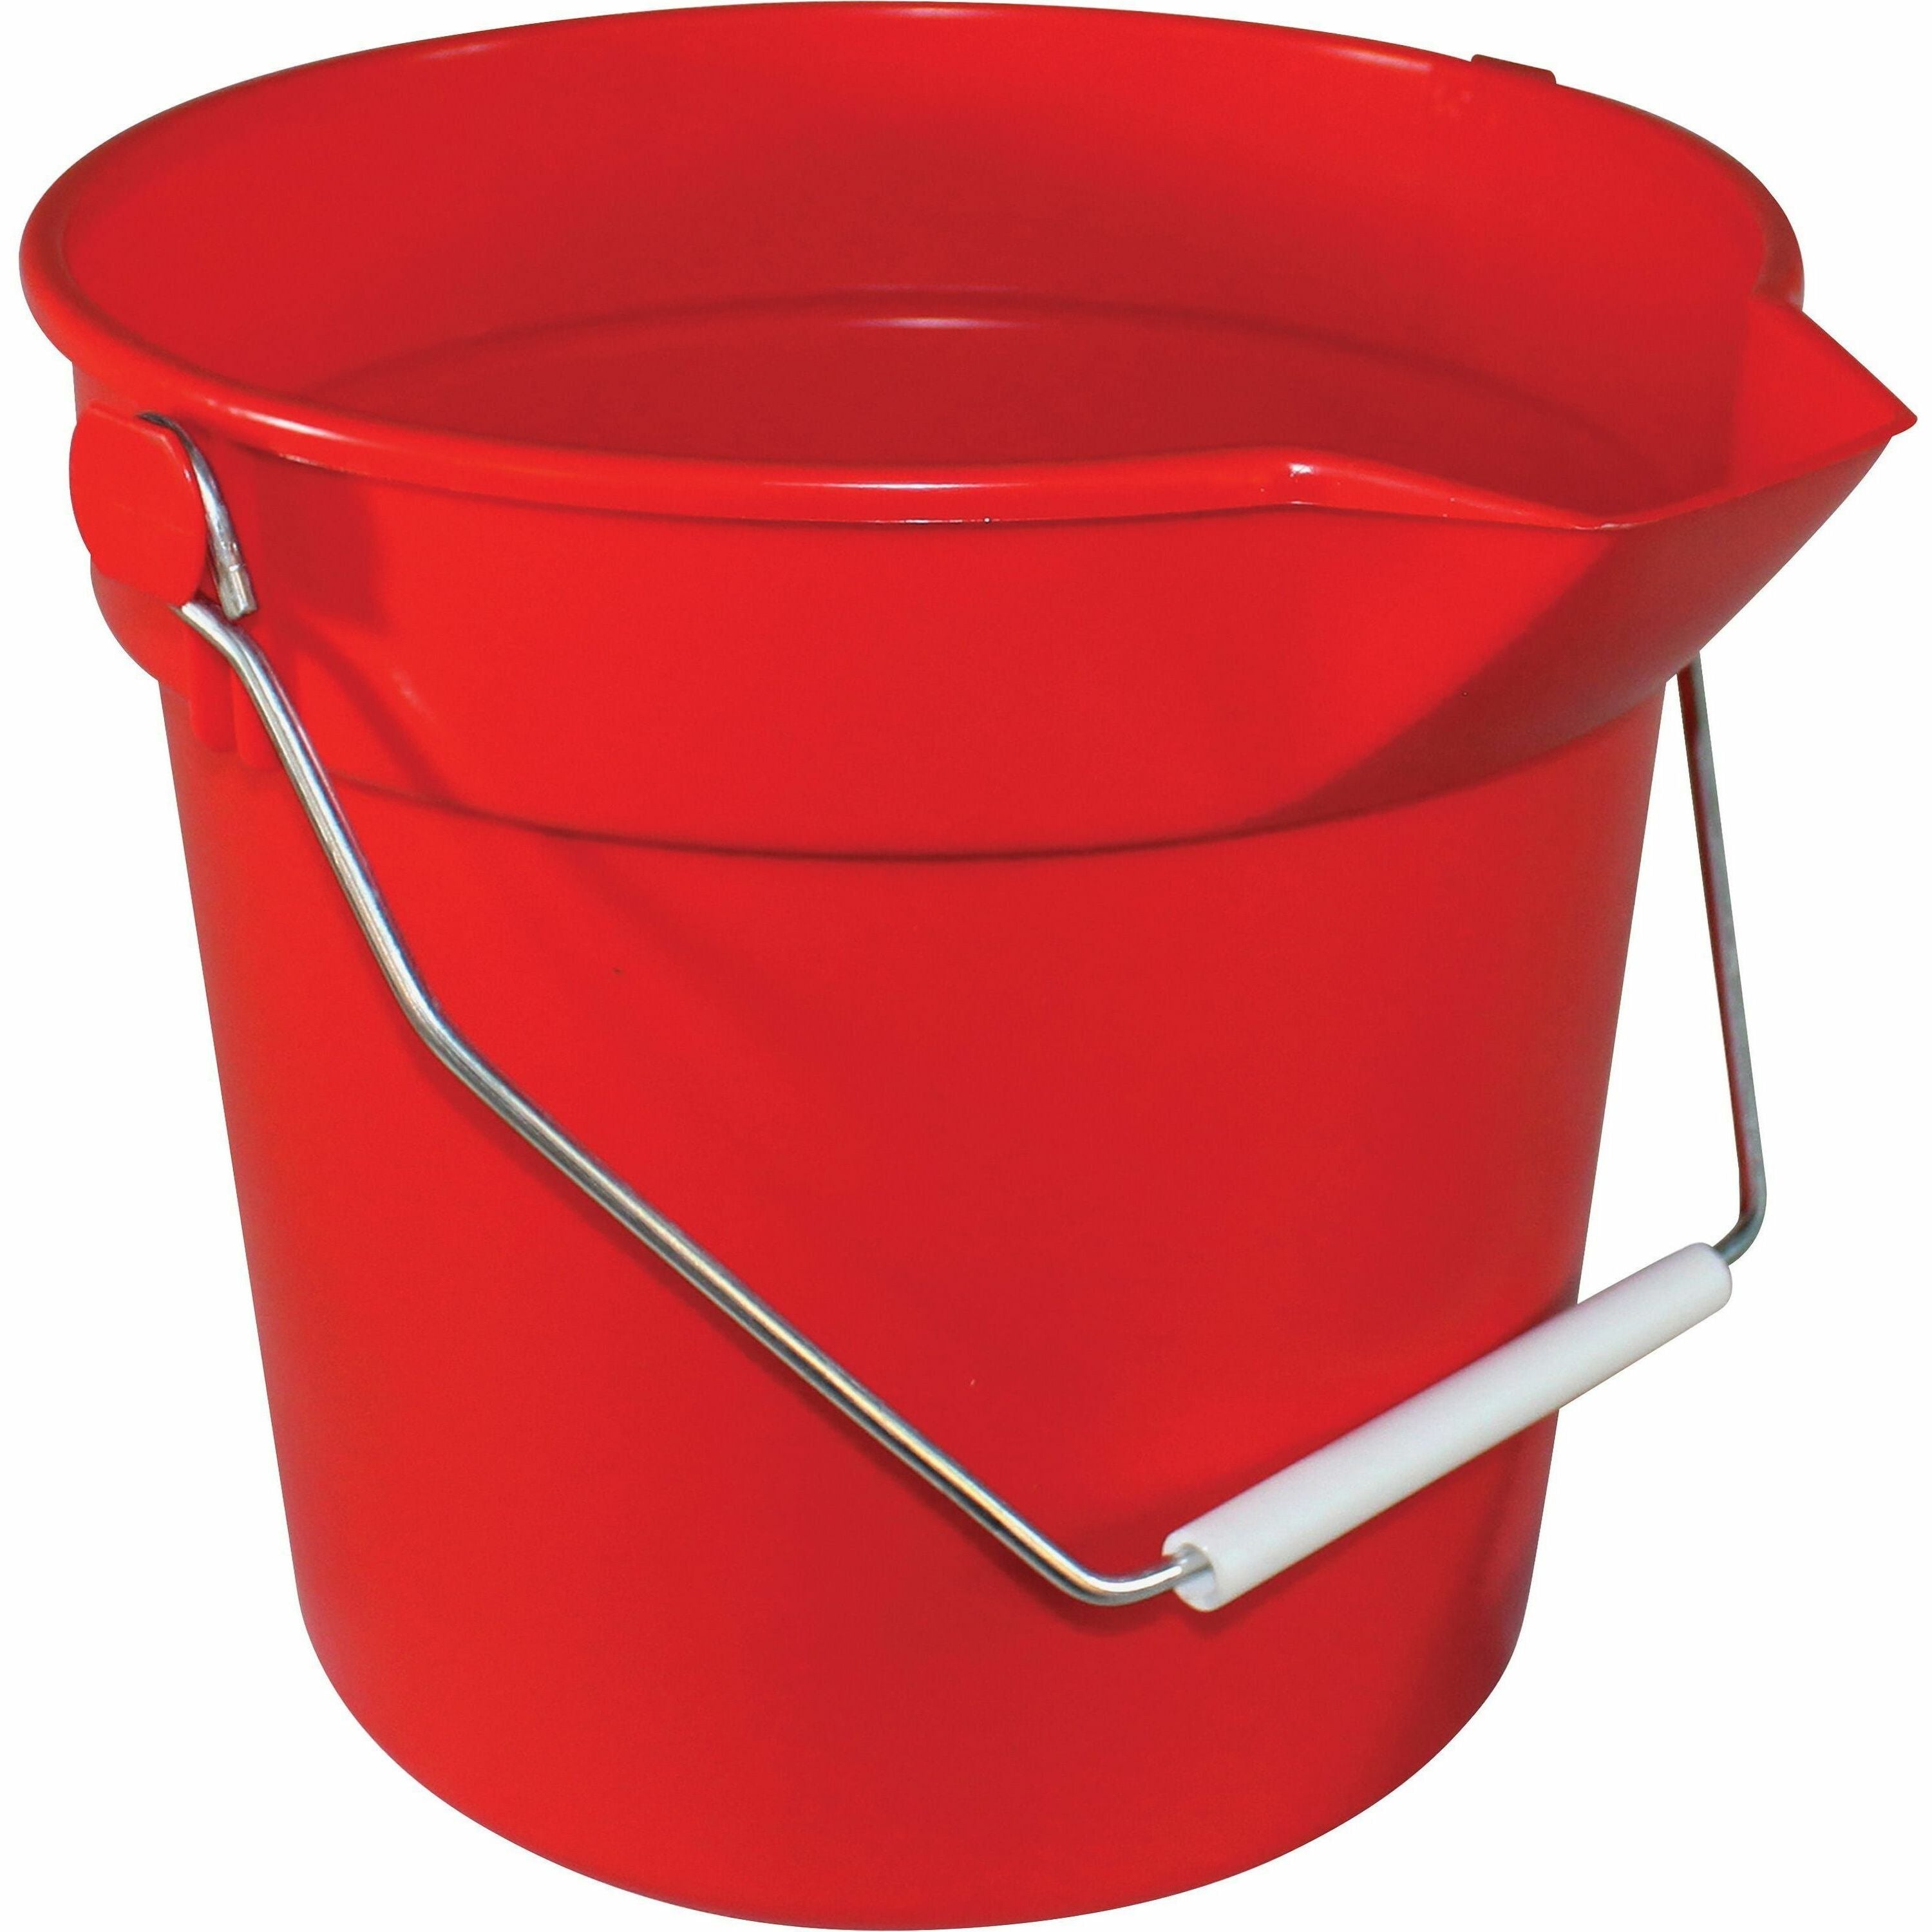 Impact 10-quart Deluxe Bucket - 2.50 gal - Handle, Spill Resistant, Embossed, Acid Resistant, Alkali Resistant, Chemical Resistant, Heavy Duty, Rugged - 10.2" x 11.1" - Polypropylene - Red - 1 Each - 